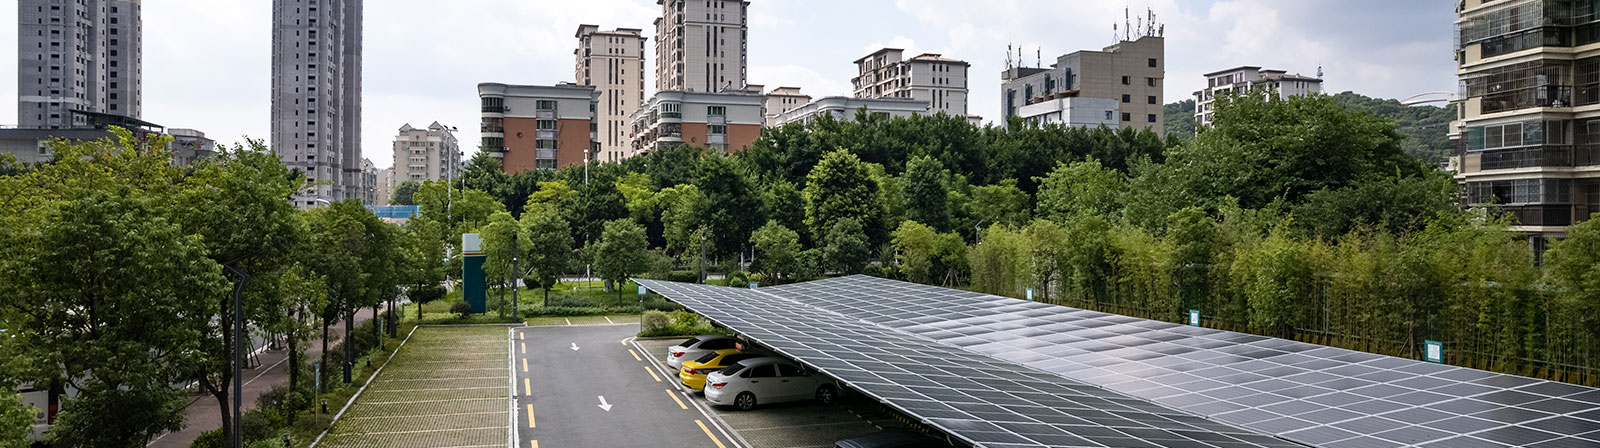 parking-lot-w-solar-panels_zhihao_GettyImages